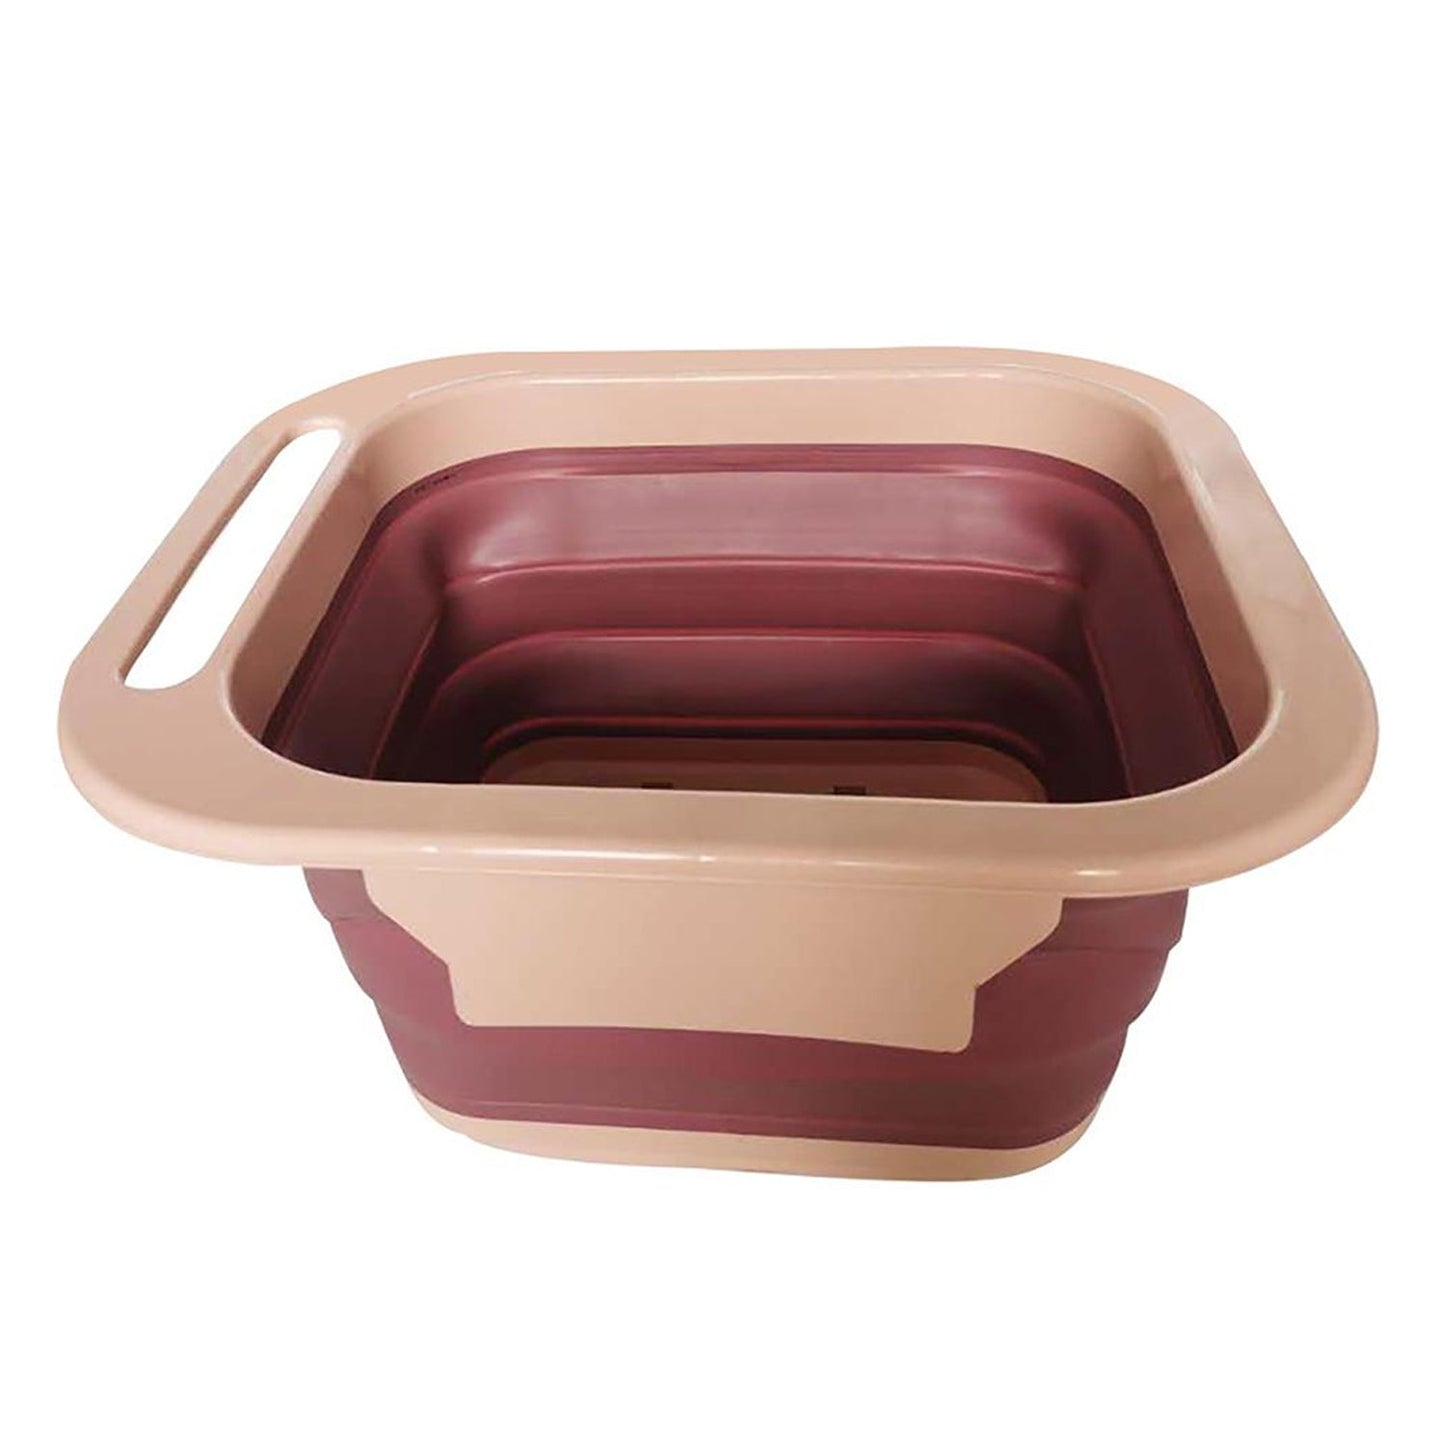 7389 Foldable Soaking Foot Massage Tub, Spa Basin, Bucket with Massage Roller, Suitable For Home Spa Pedicure Relieve Stress 